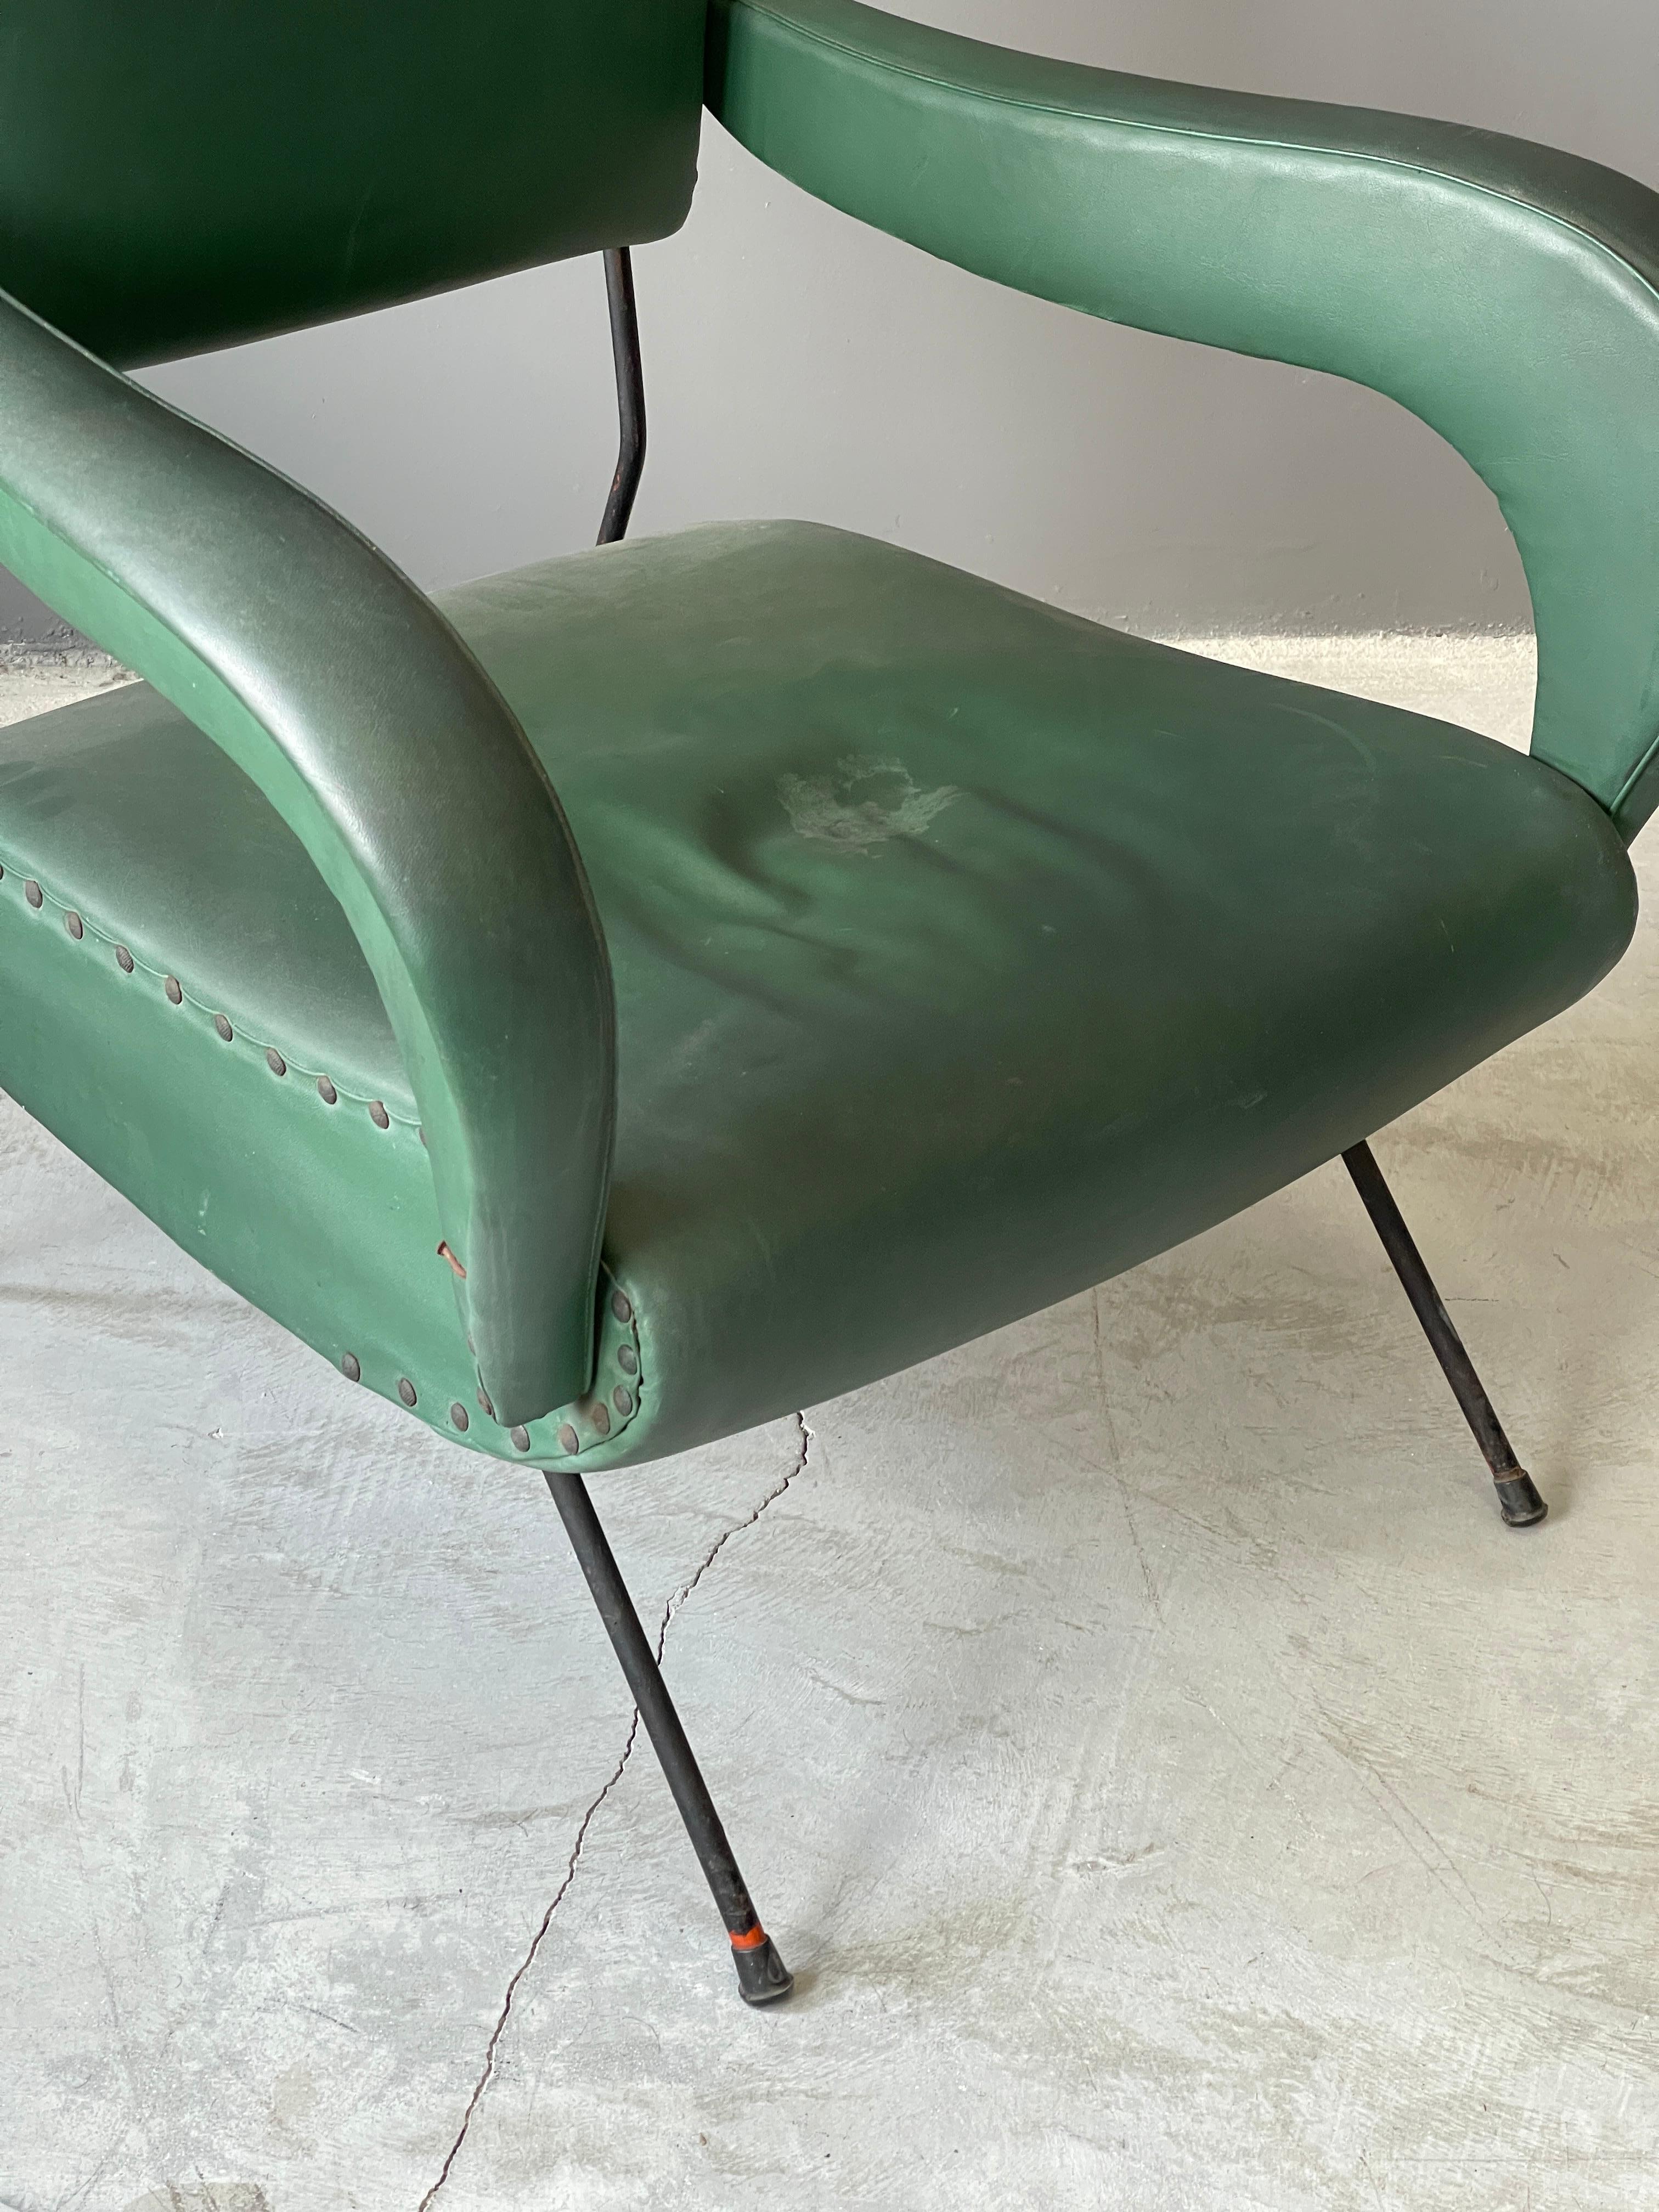 Mid-20th Century Italian Designer, Lounge Chairs, Lacquered Metal, Green-Dyed Vinyl, Italy, 1950s For Sale